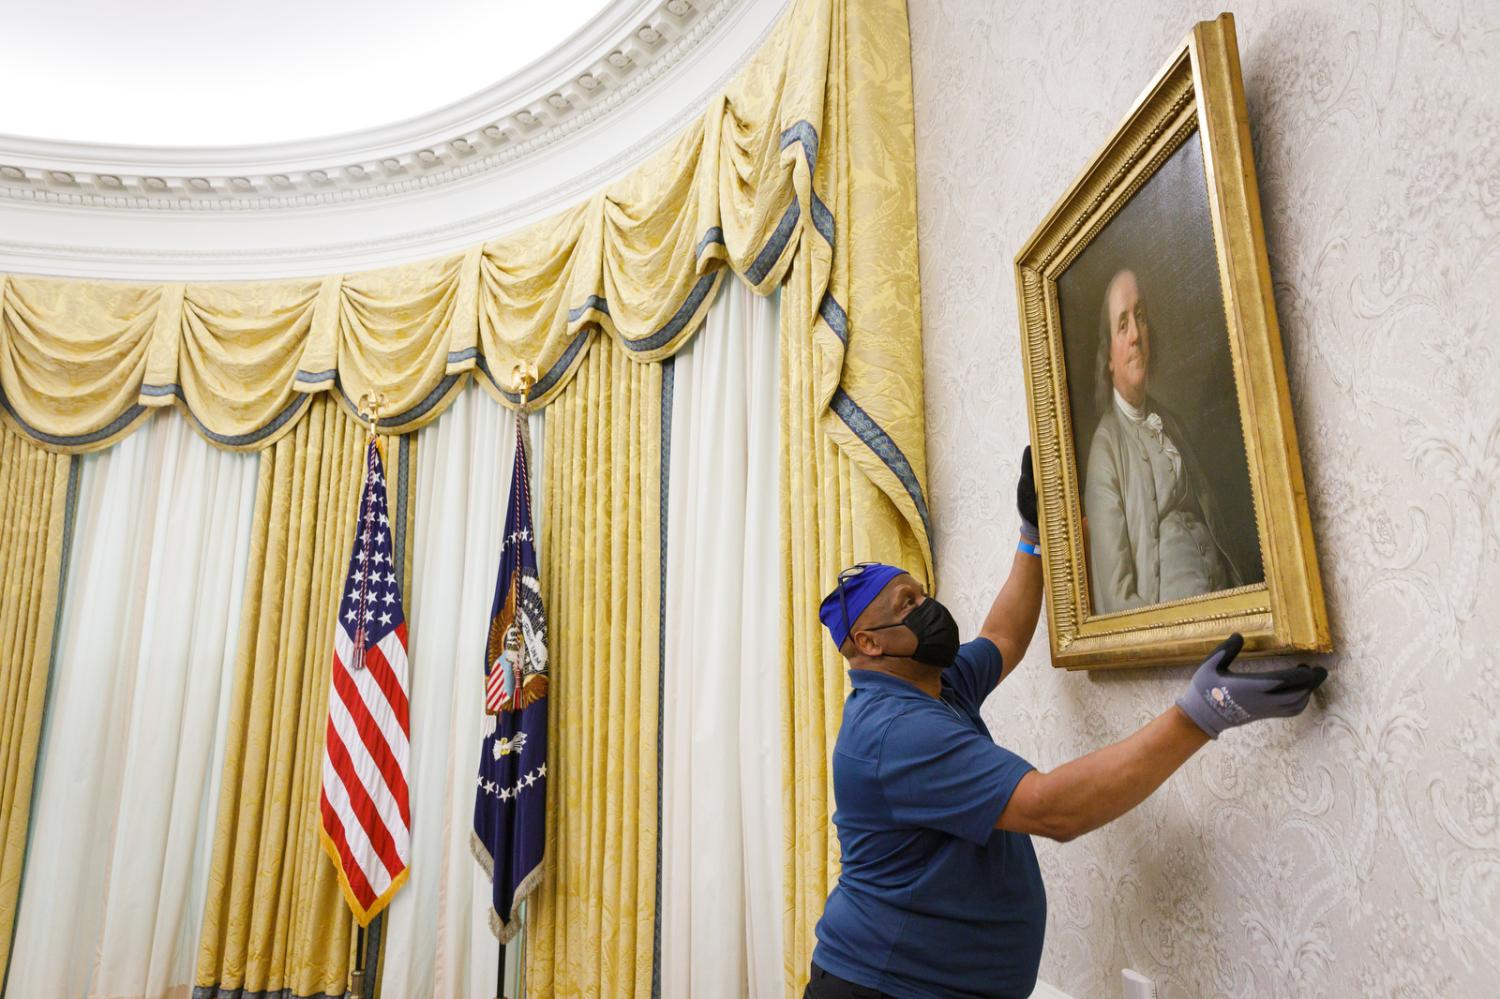 A member of the White House General Services staff hangs a painting